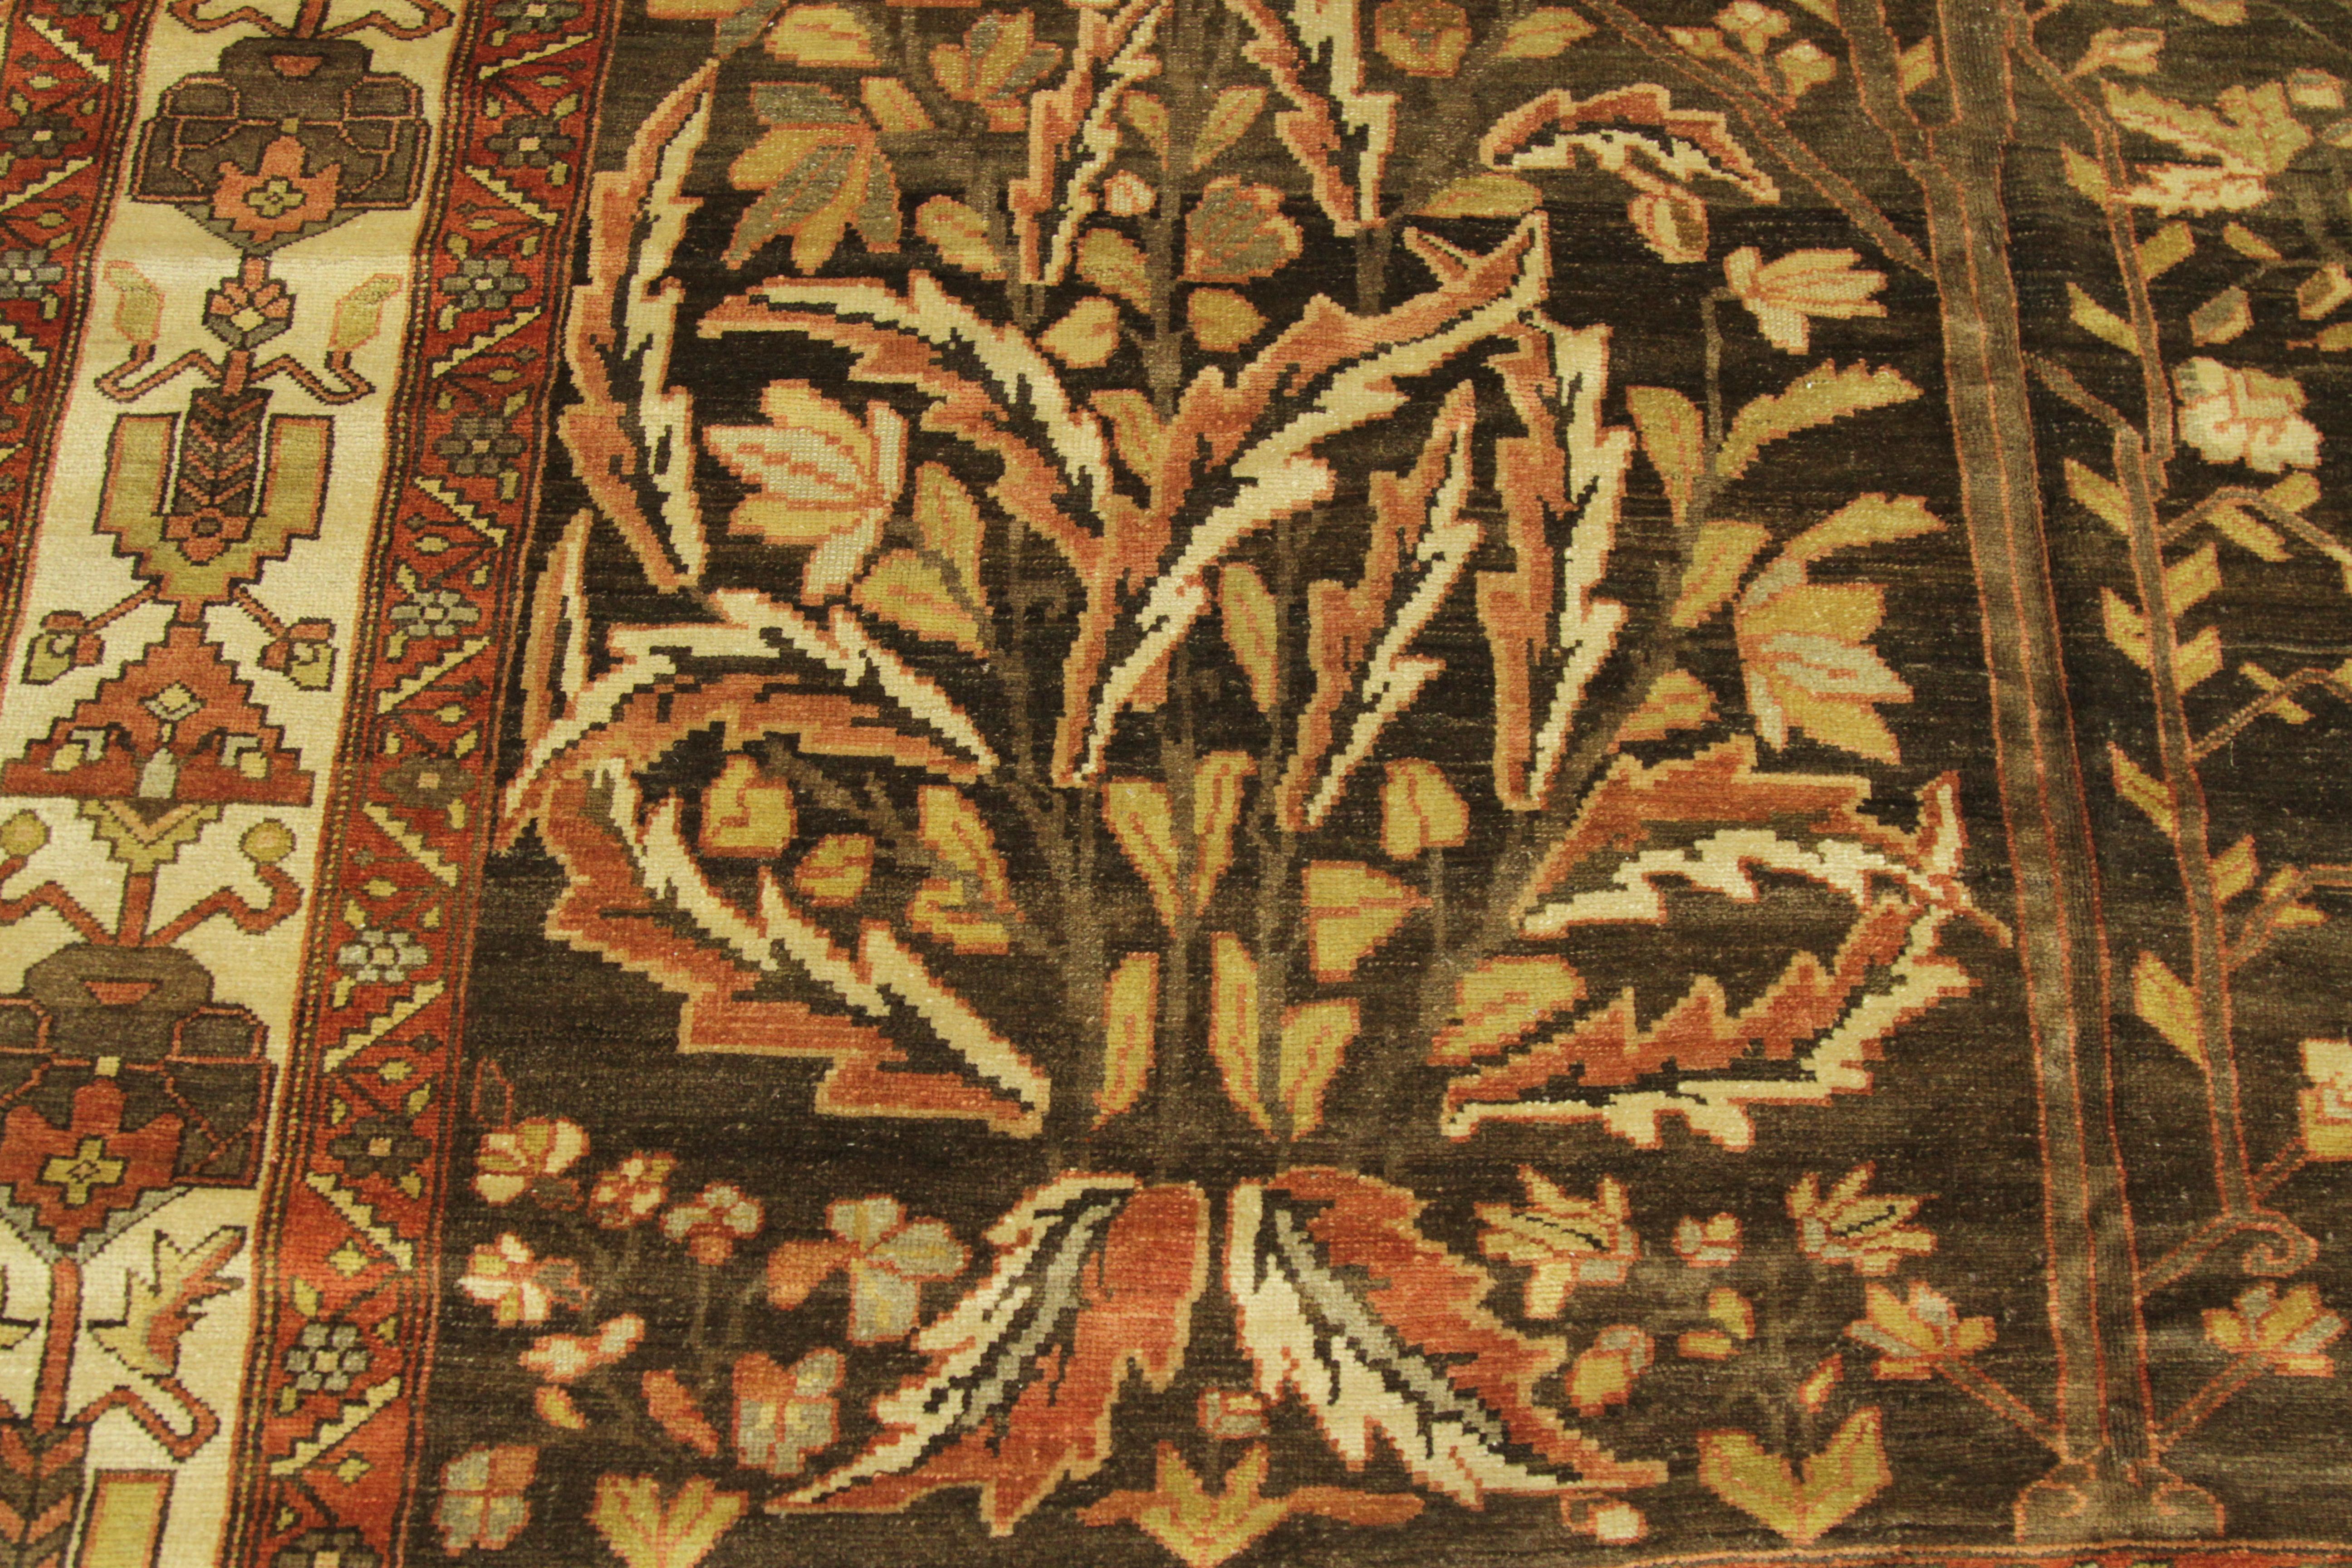 1940s Antique Persian Rug Bakhtiar Design with ‘Tree of Life’ Floral Patterns For Sale 1